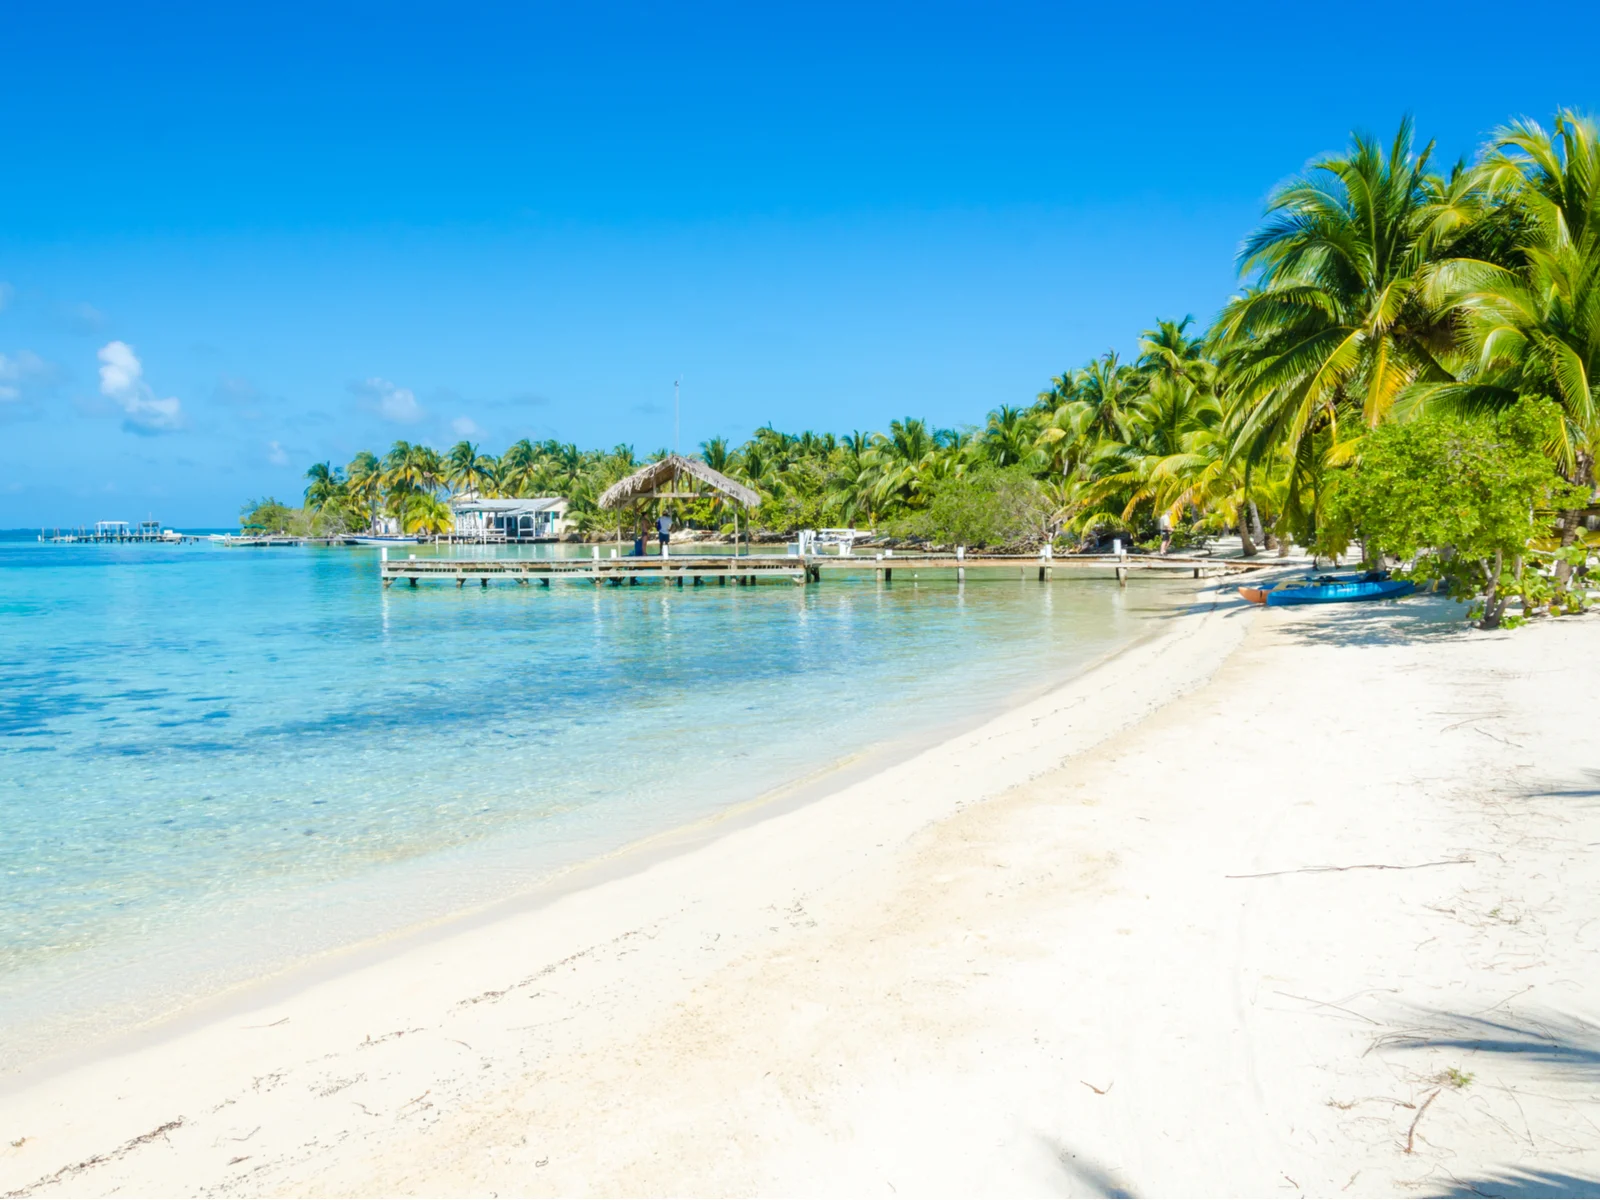 Belize Caye pictured during the best time to visit with white sand beaches and calm teal water